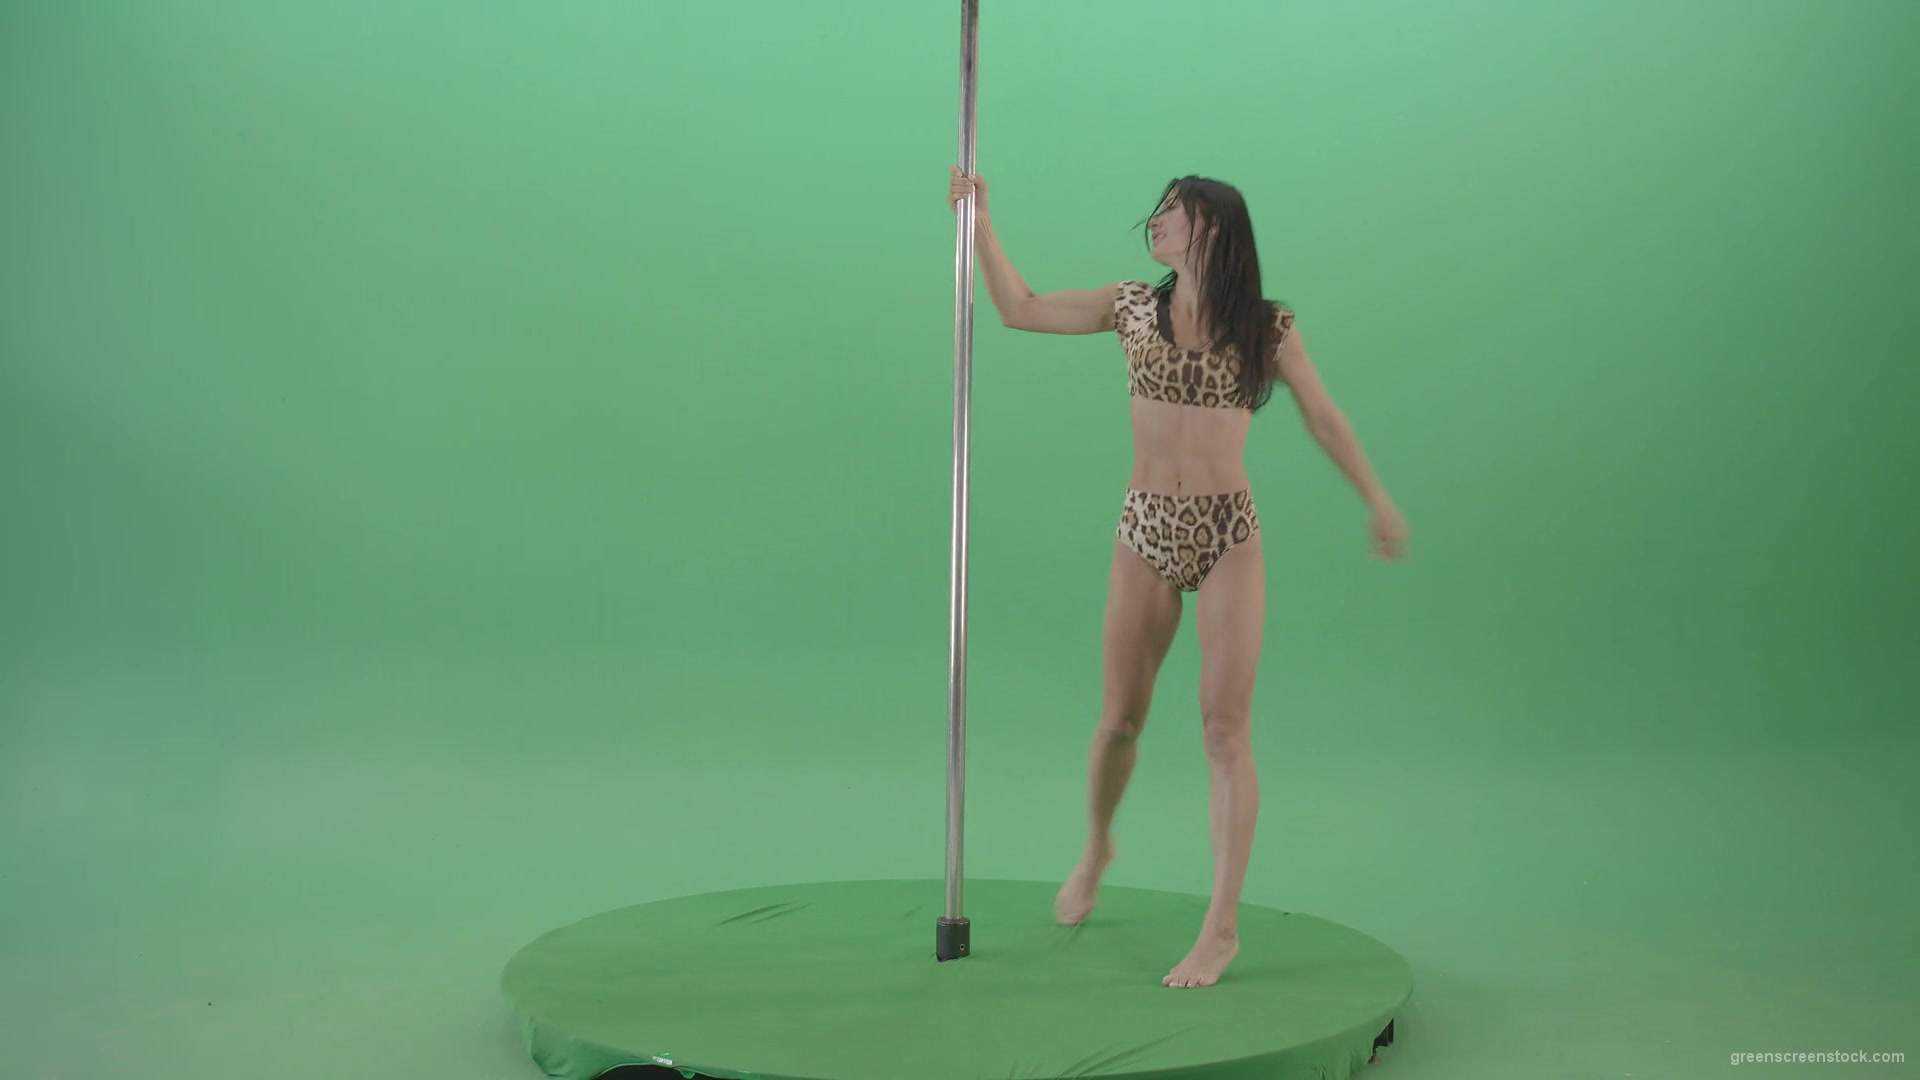 Gymnast-Girl-in-leopard-animal-underwear-spinning-fast-in-pole-dance-isolated-on-Green-Screen-4K-Video-Footage-1920_002 Green Screen Stock